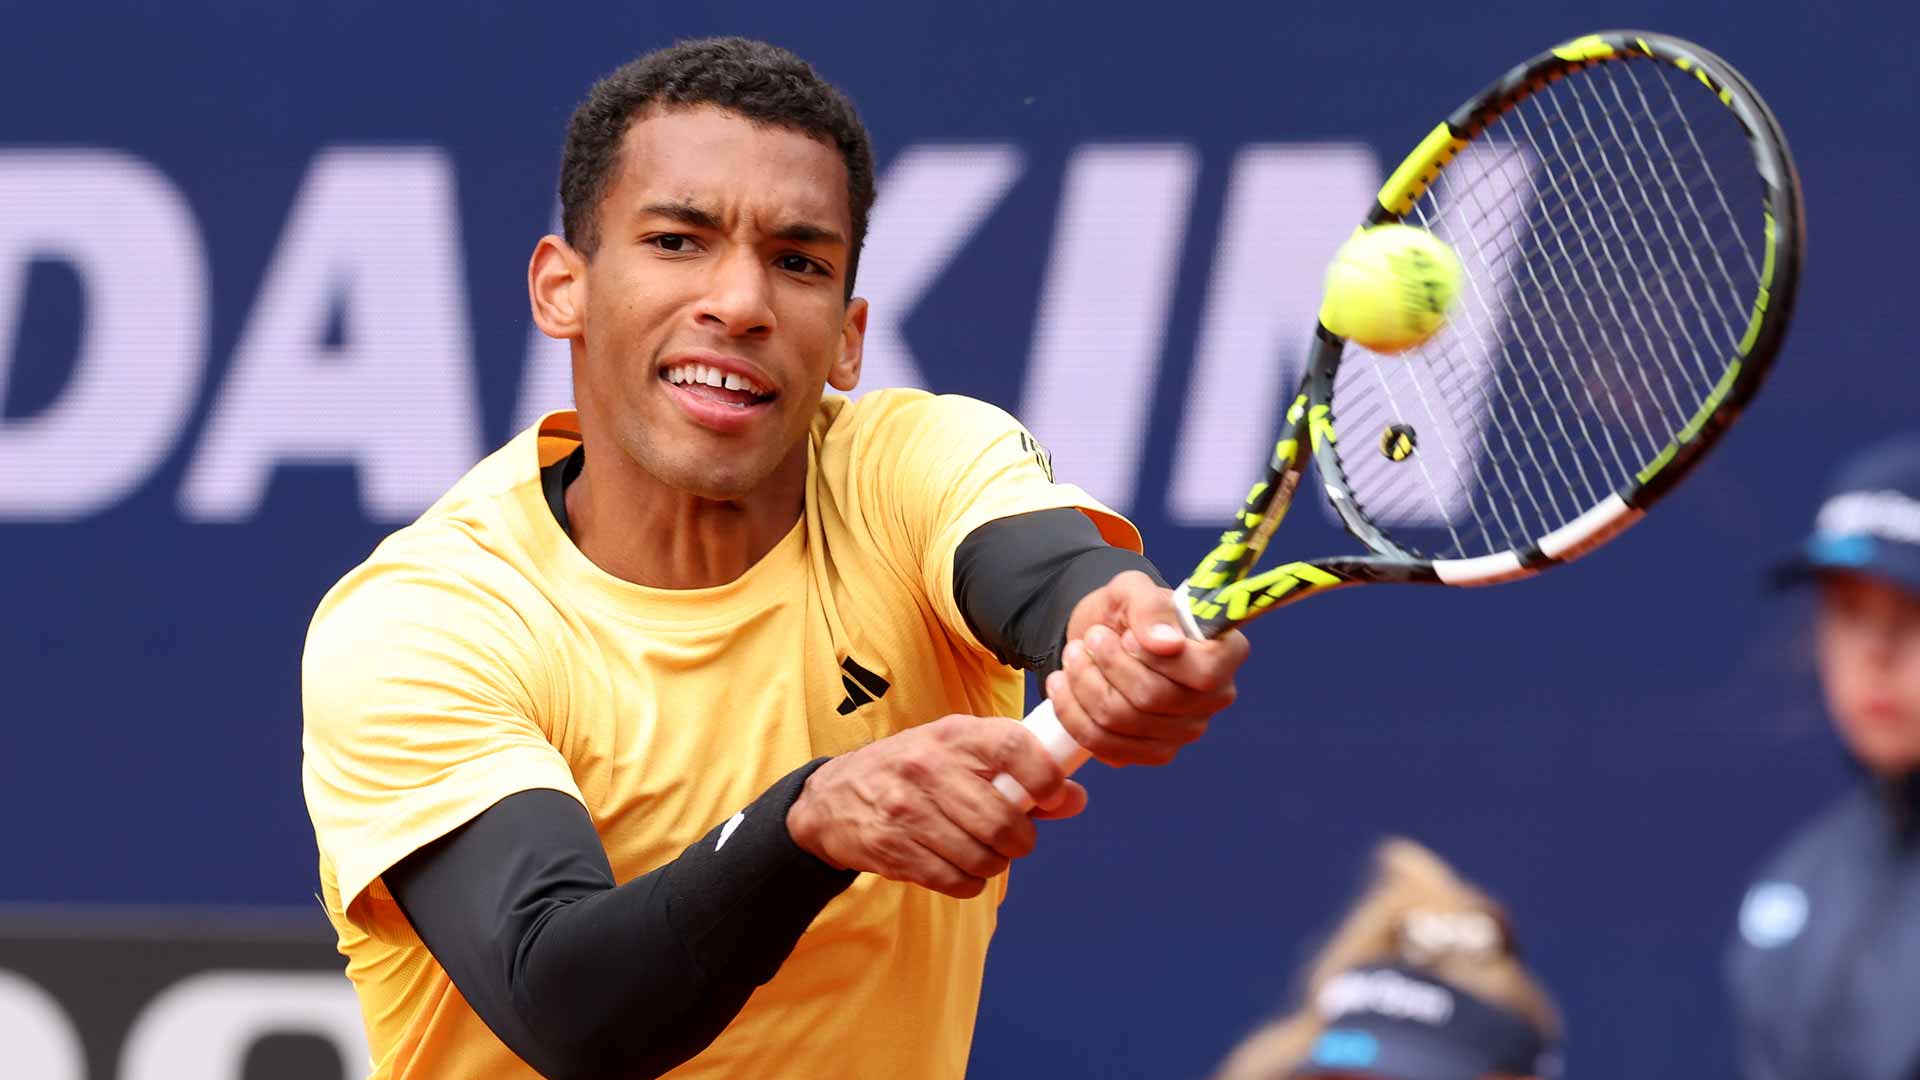 Felix Auger-Aliassime defeats Maximilian Marterer at the BMW Open after three hours, 24 minutes.